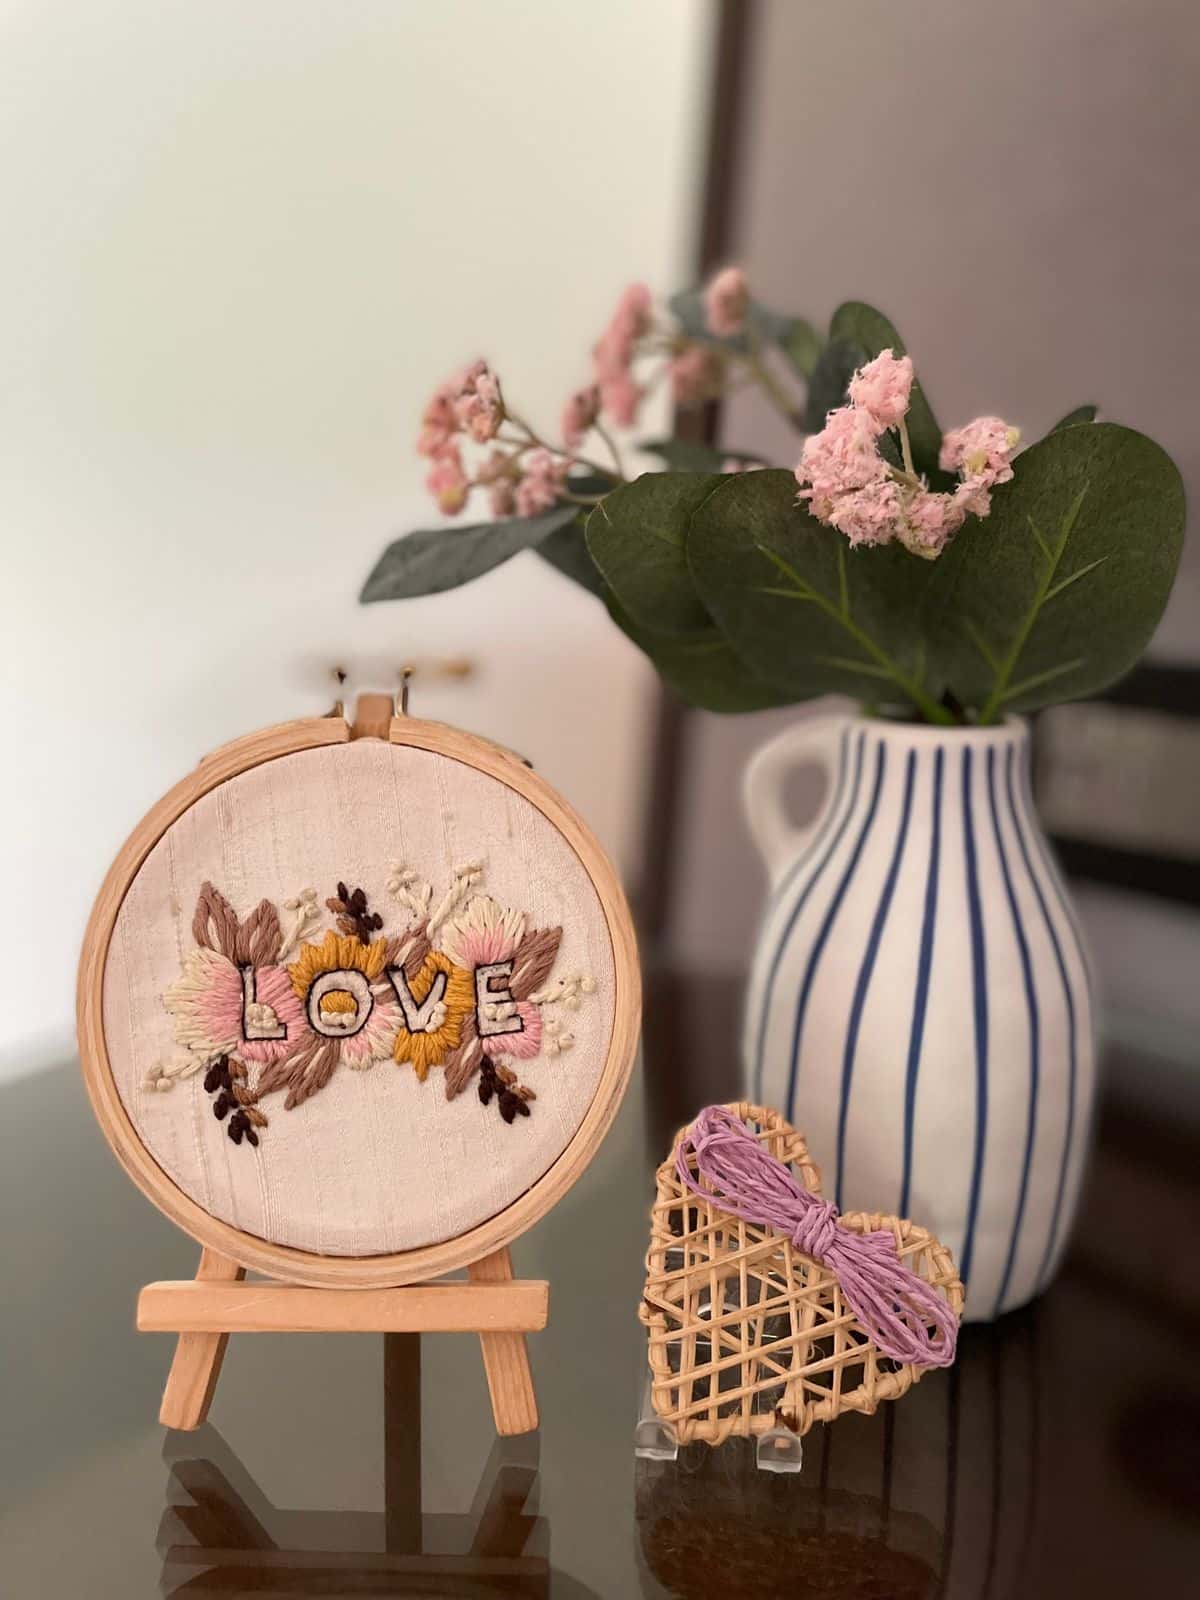 Embroidery hoops #LOVE